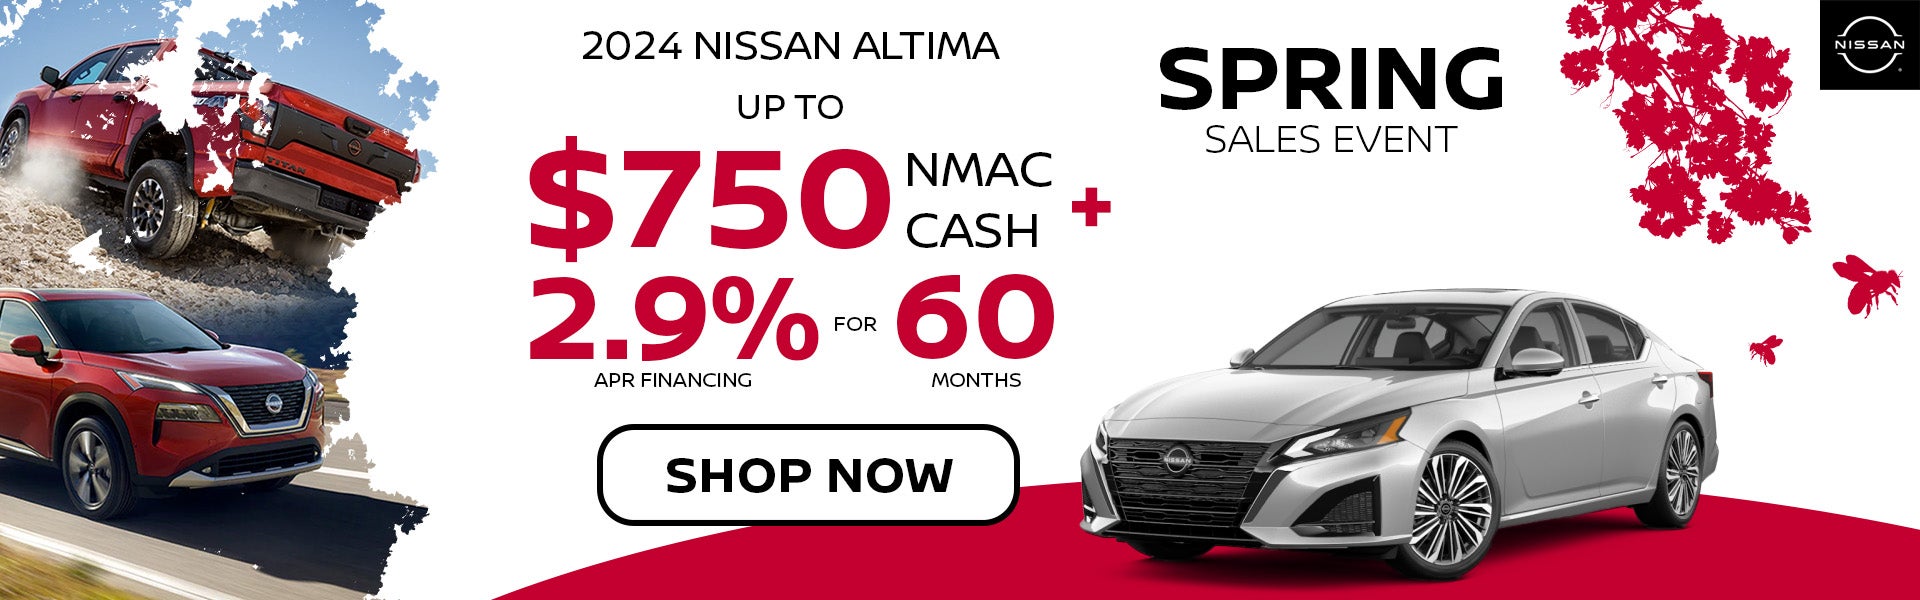 2024 Nissan Altima Special Offer